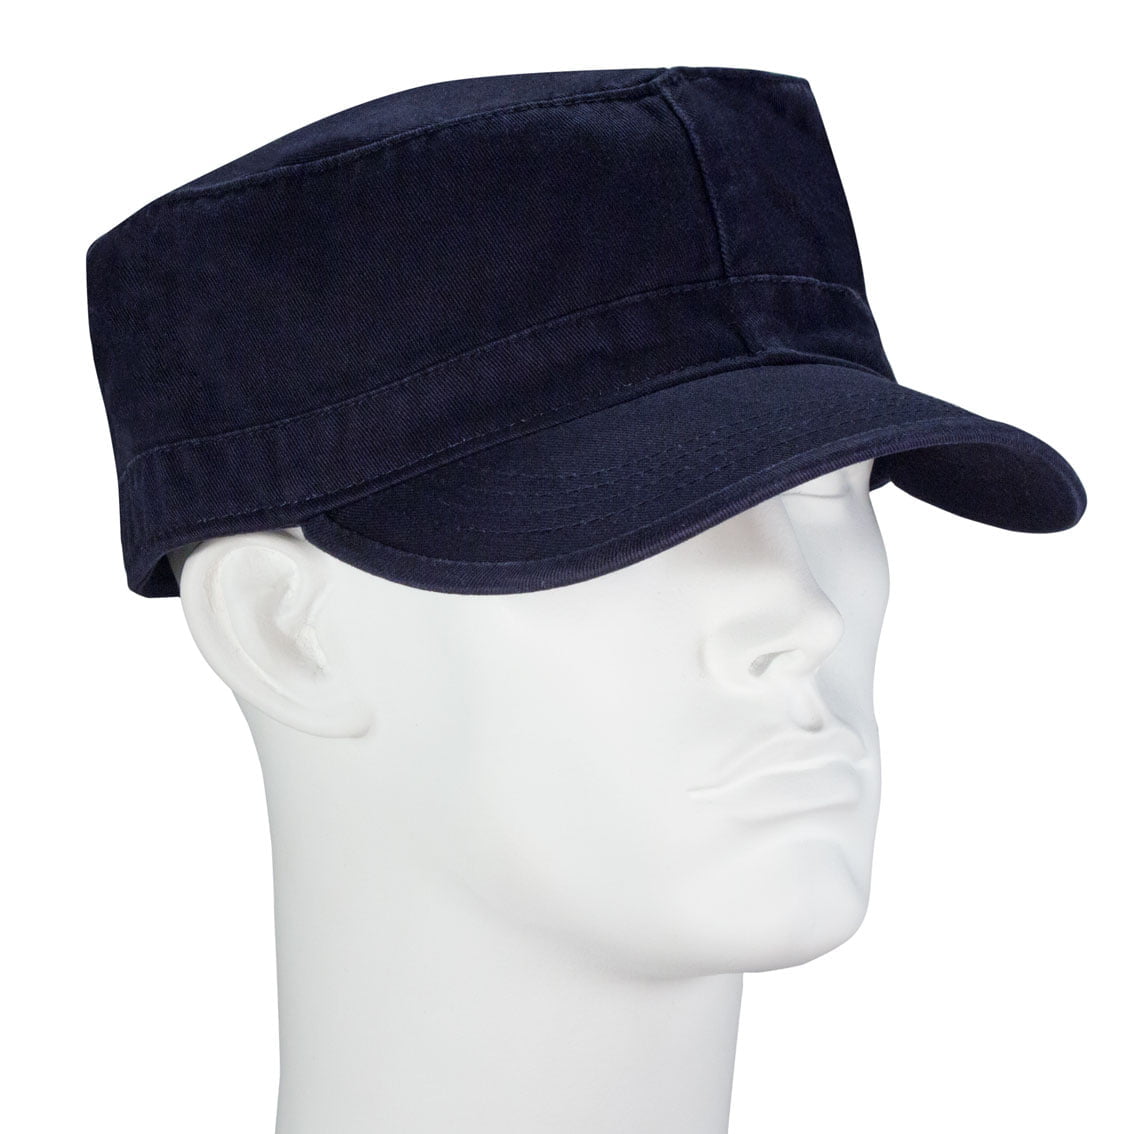 1pc Navy Plain Castro Military Fatigue Army Hat - Fitted - Unconstructed - 100% Cotton